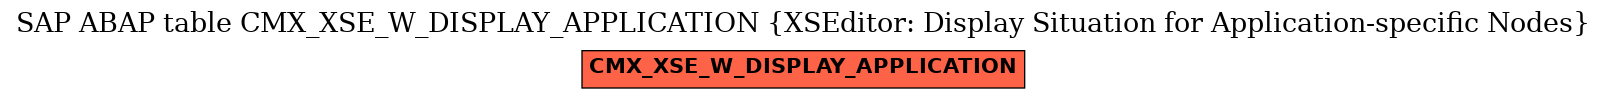 E-R Diagram for table CMX_XSE_W_DISPLAY_APPLICATION (XSEditor: Display Situation for Application-specific Nodes)